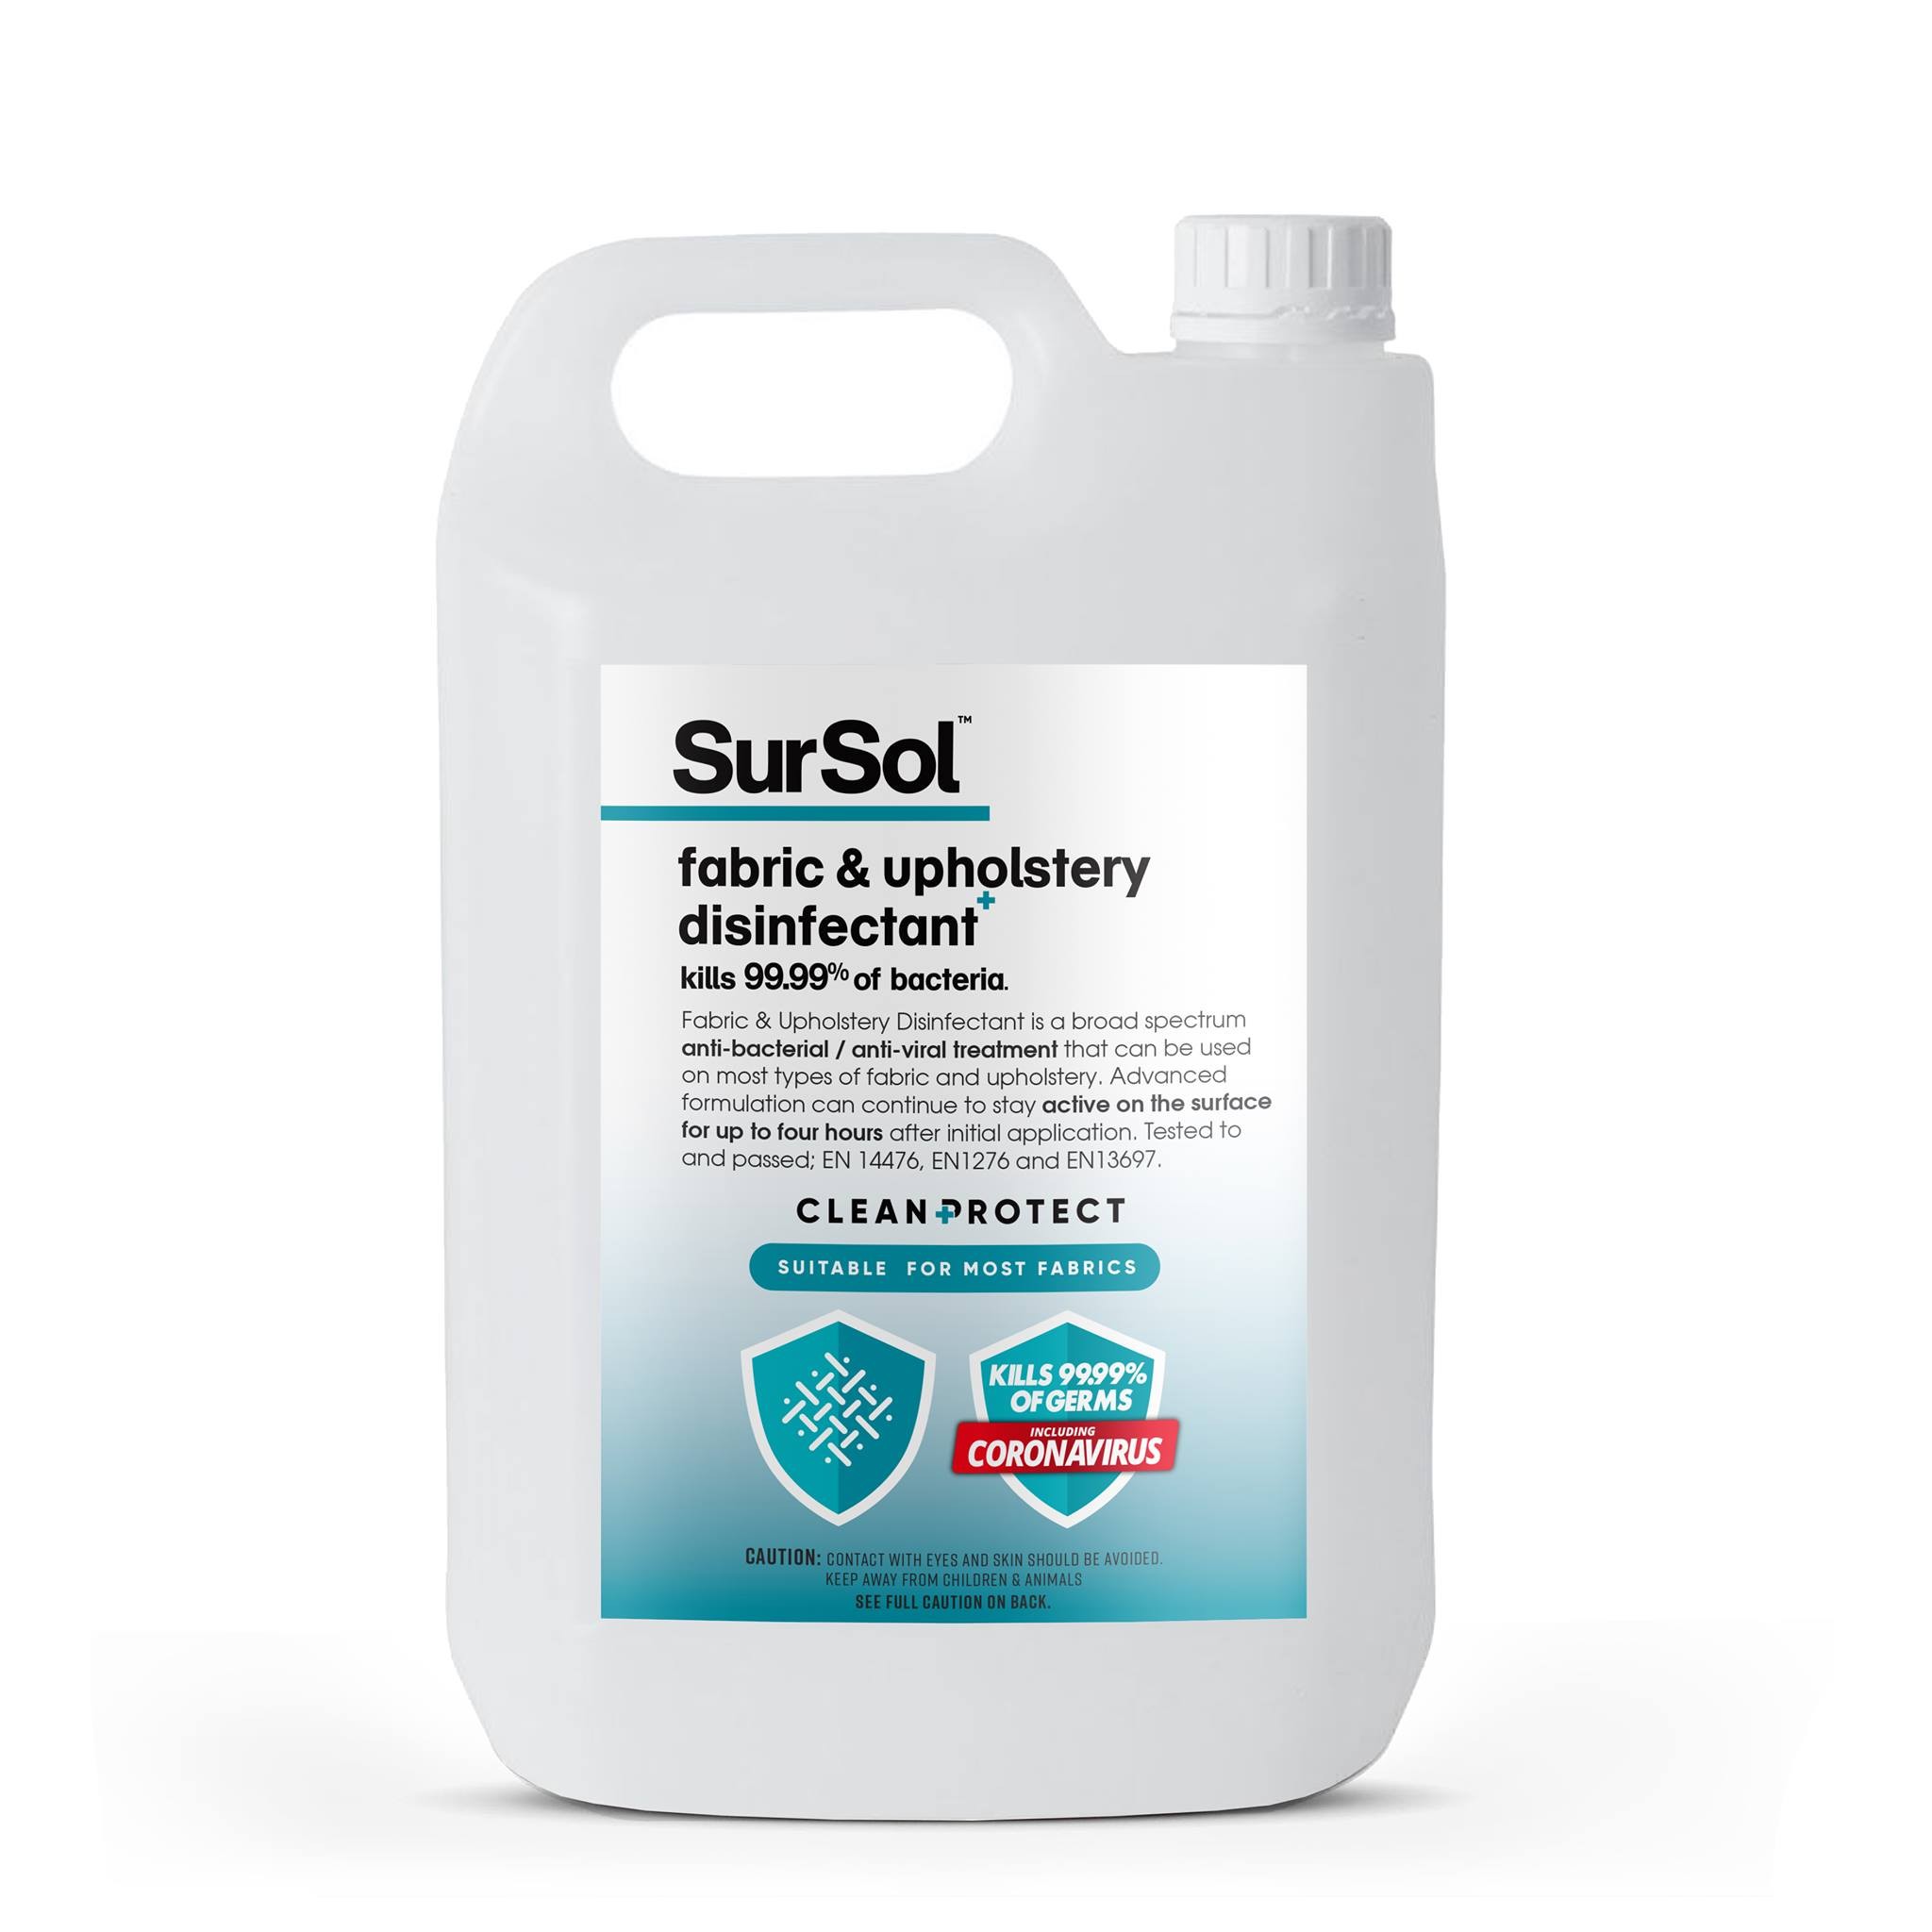 5L x SurSol Fabric and Upholstery Disinfectant 